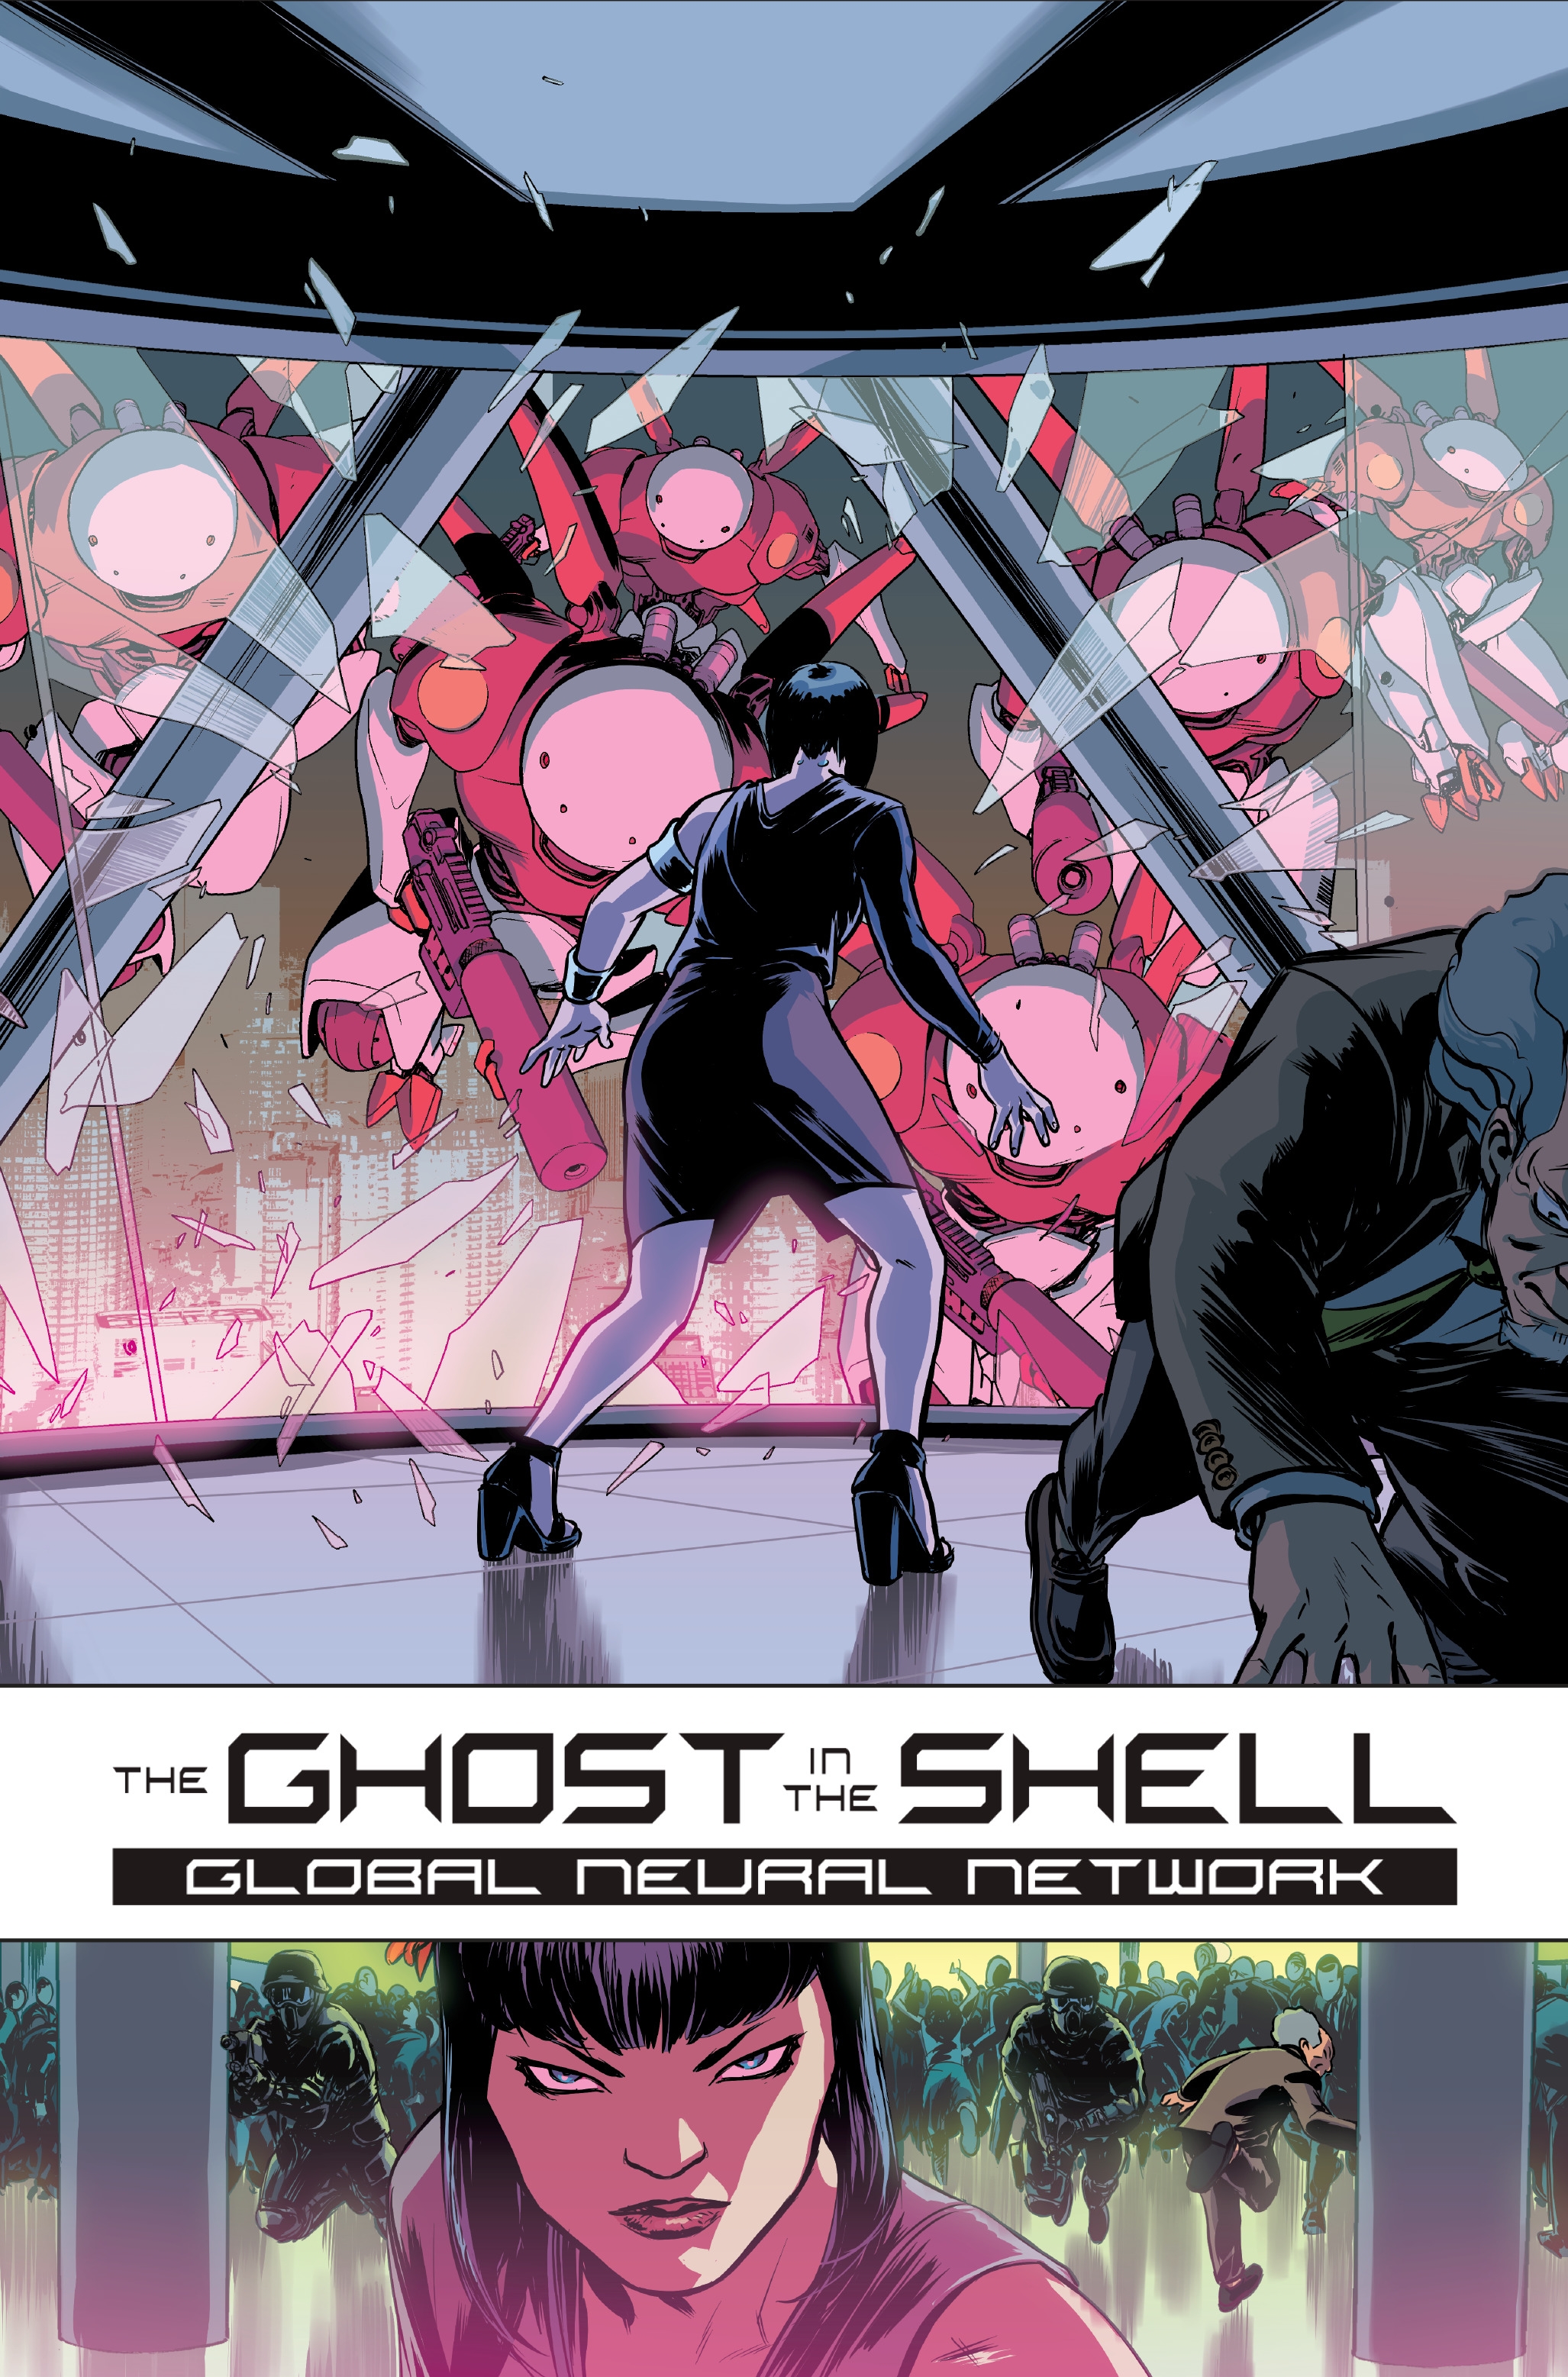 The Ghost in the Shell: Global Neural Network by Alex De Campi ...